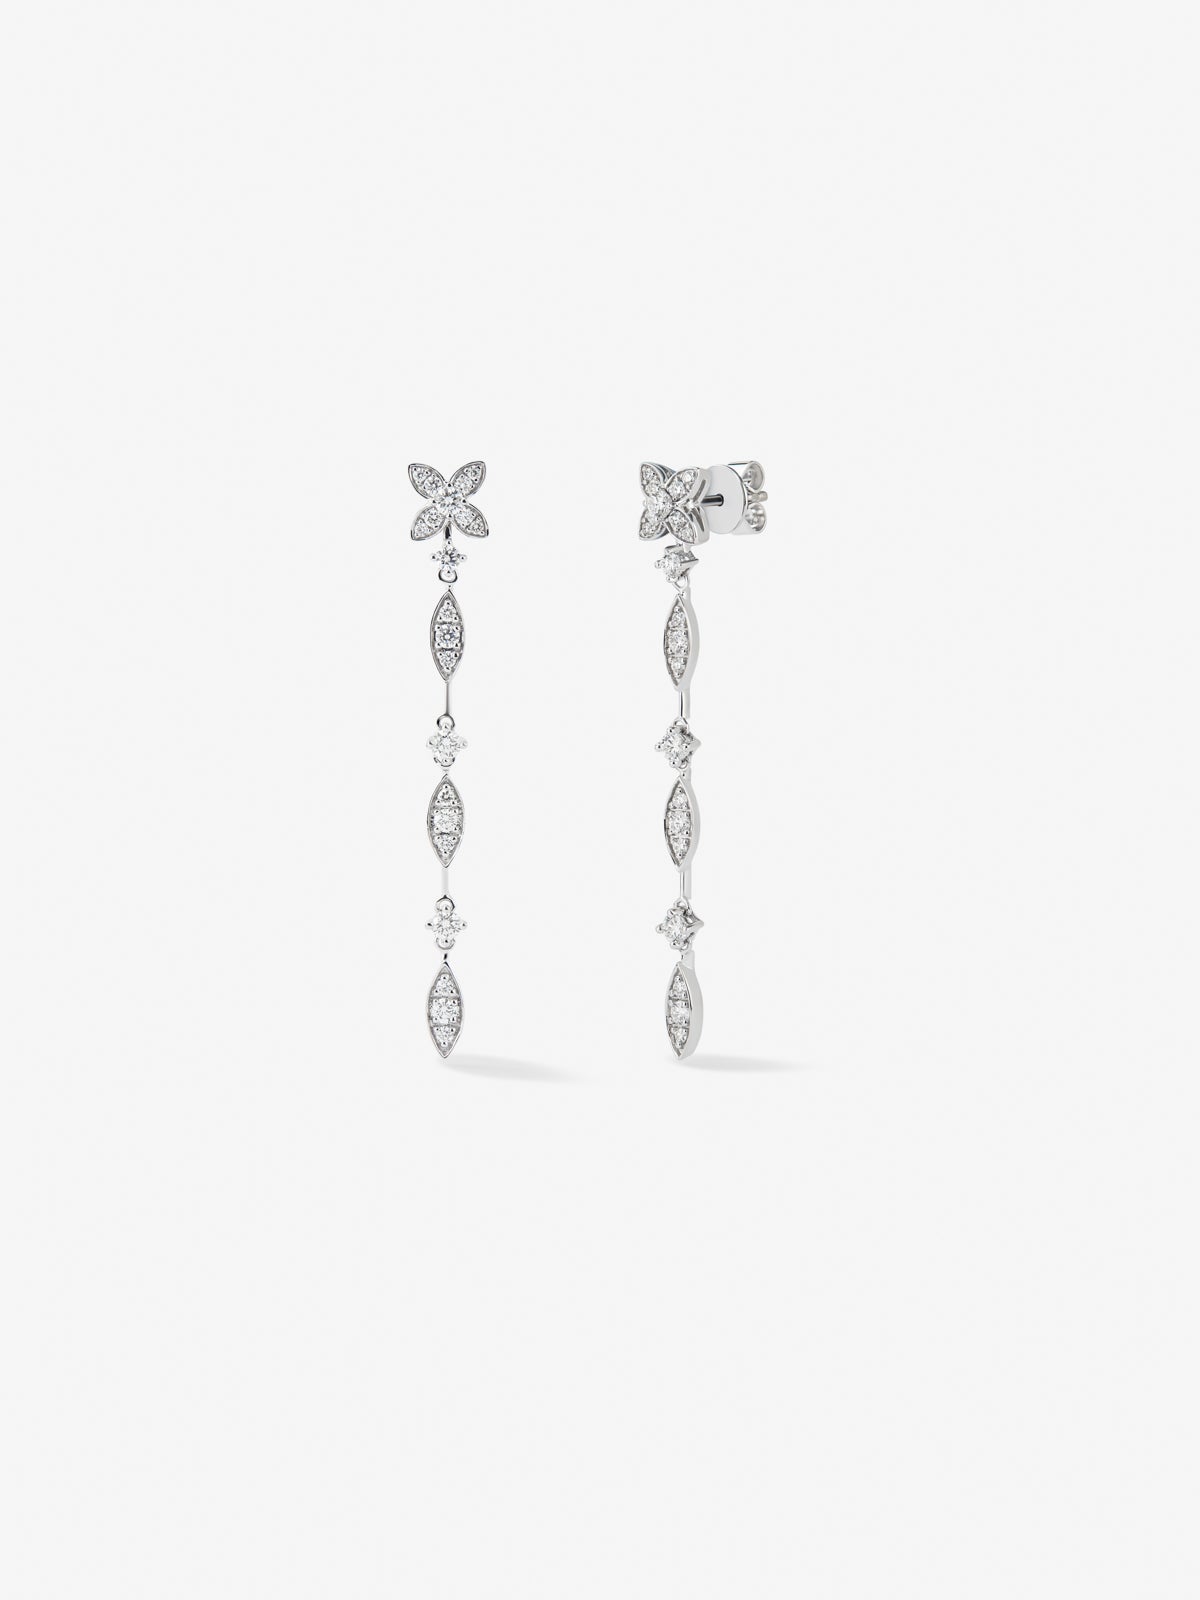 18K white gold earrings with 44 brilliant-cut diamonds with a total of 0.95 cts